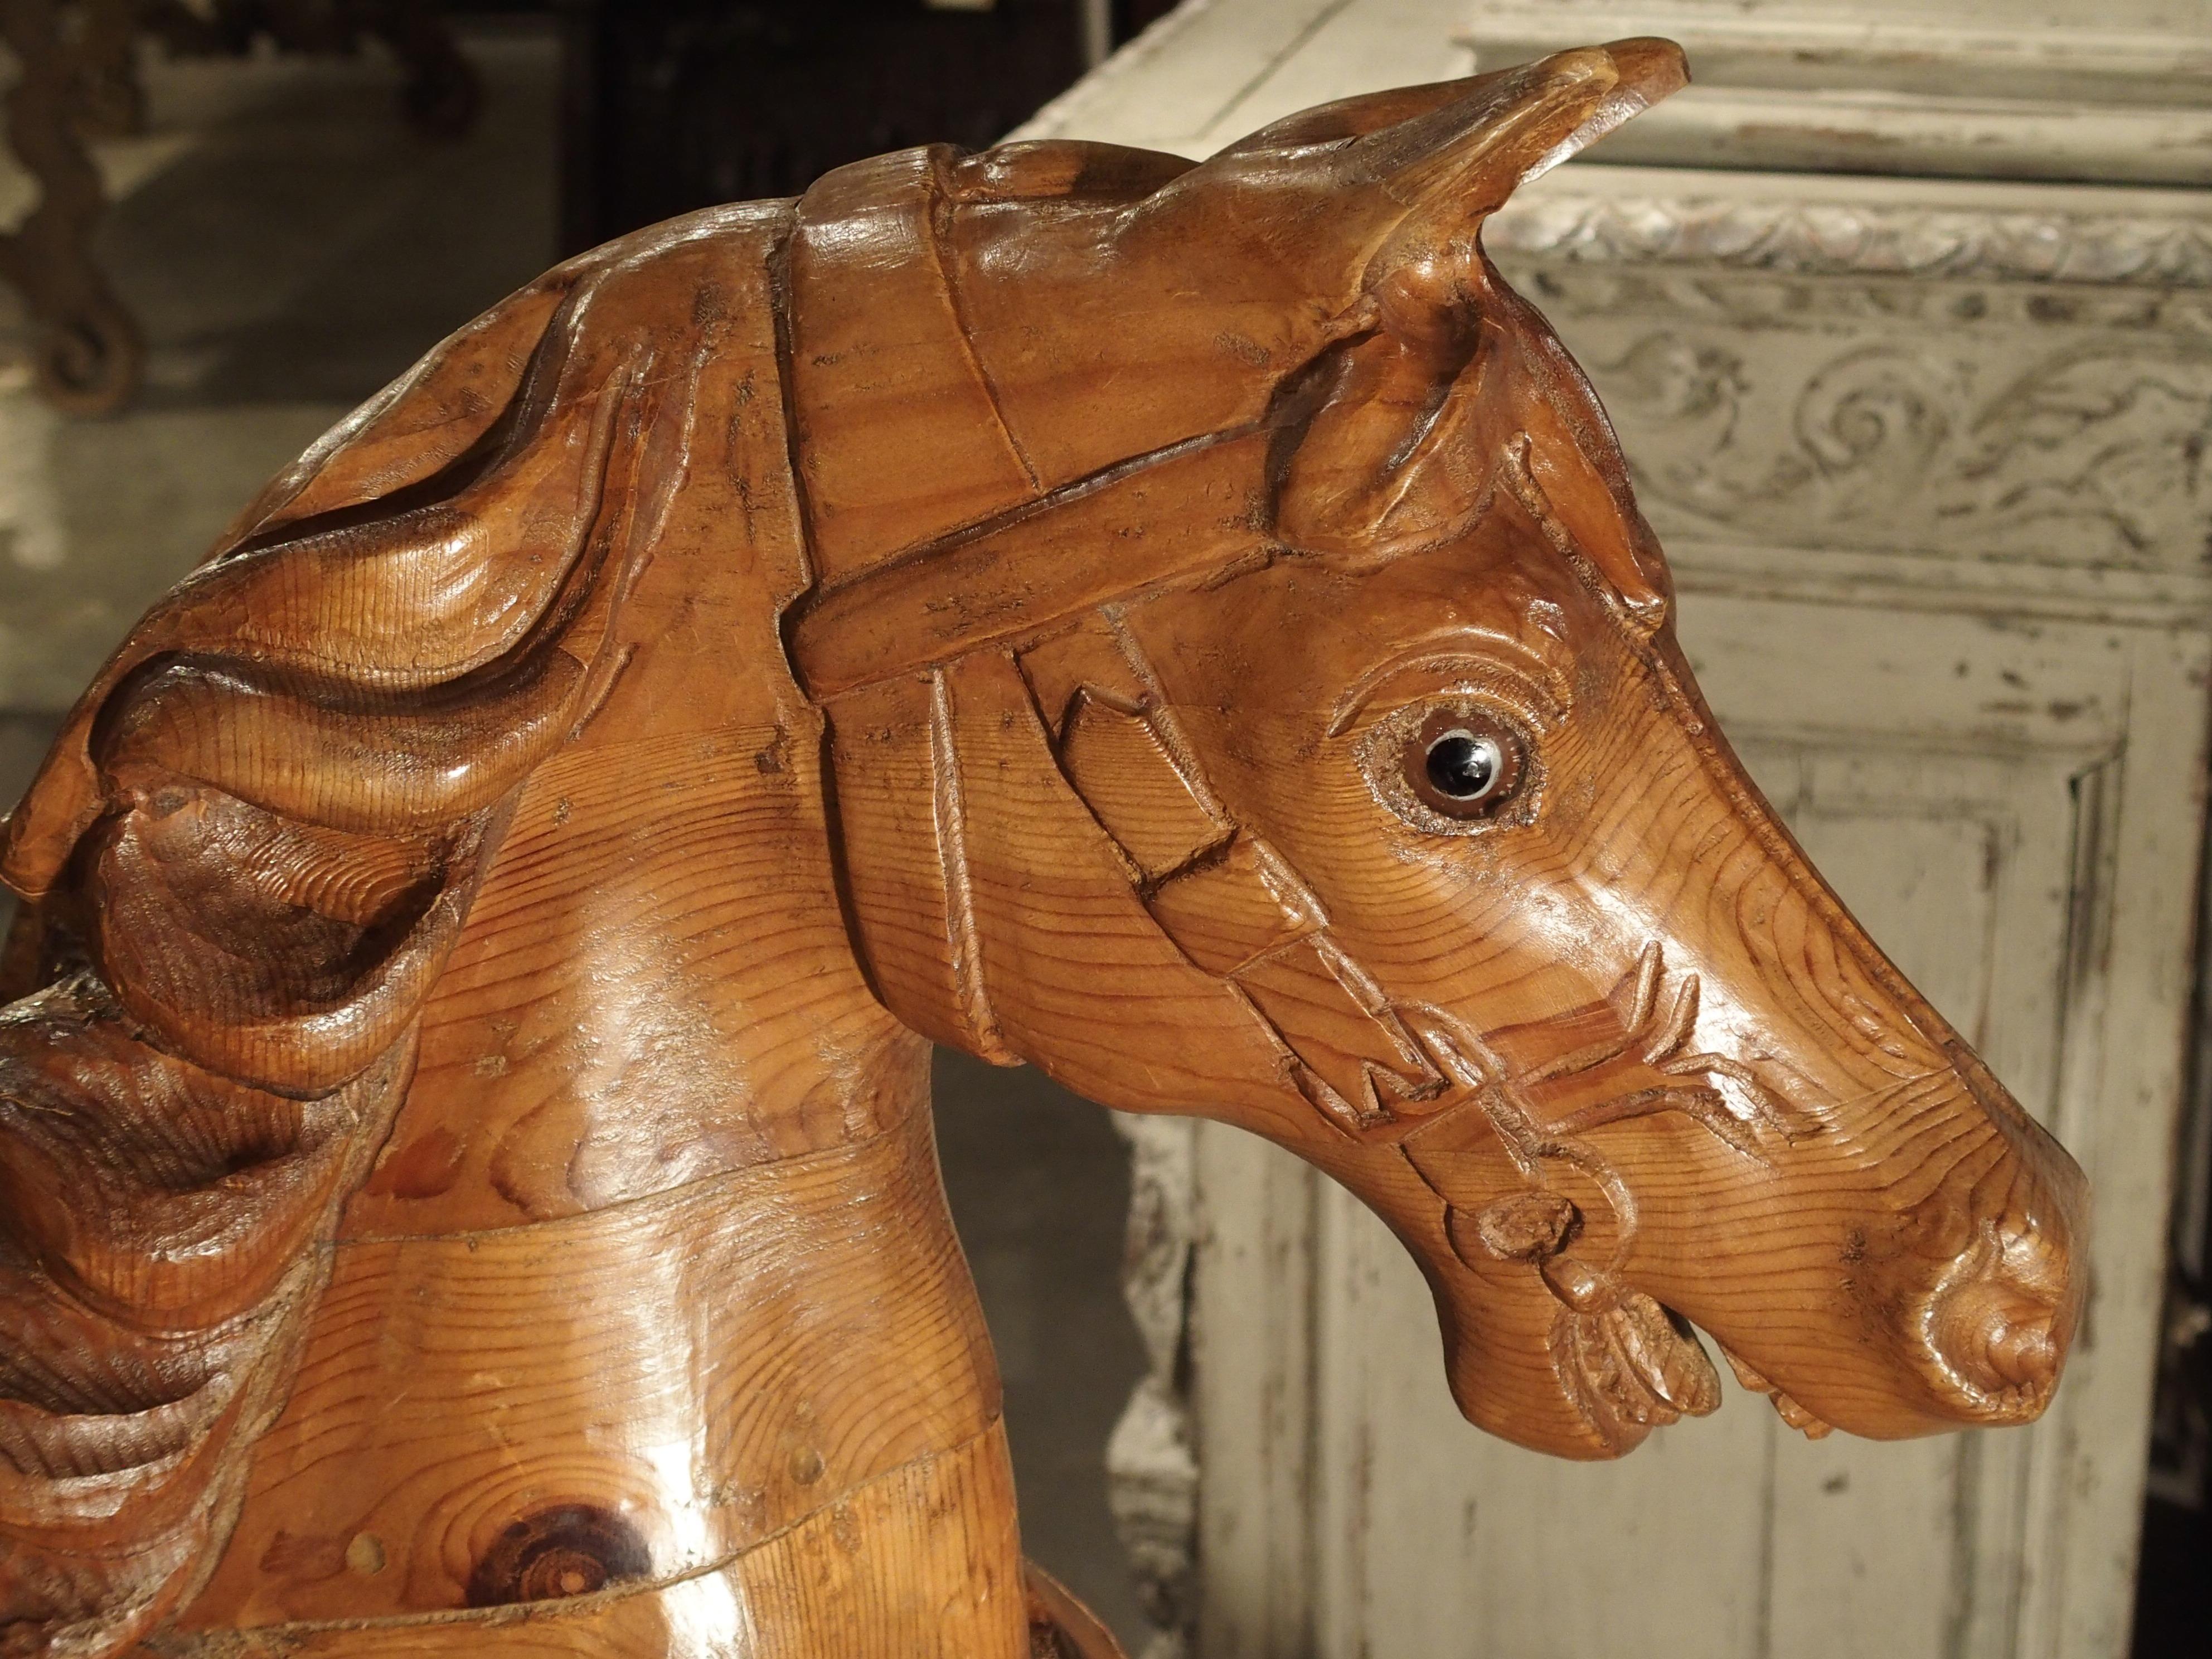 From Spain, this beautifully hand carved pine wood horse has been mounted upon a contemporary black marble stand with a black metal pole. Since there is no top hole seen on this statue, it's unlikely that it was a carousel horse. However, it may